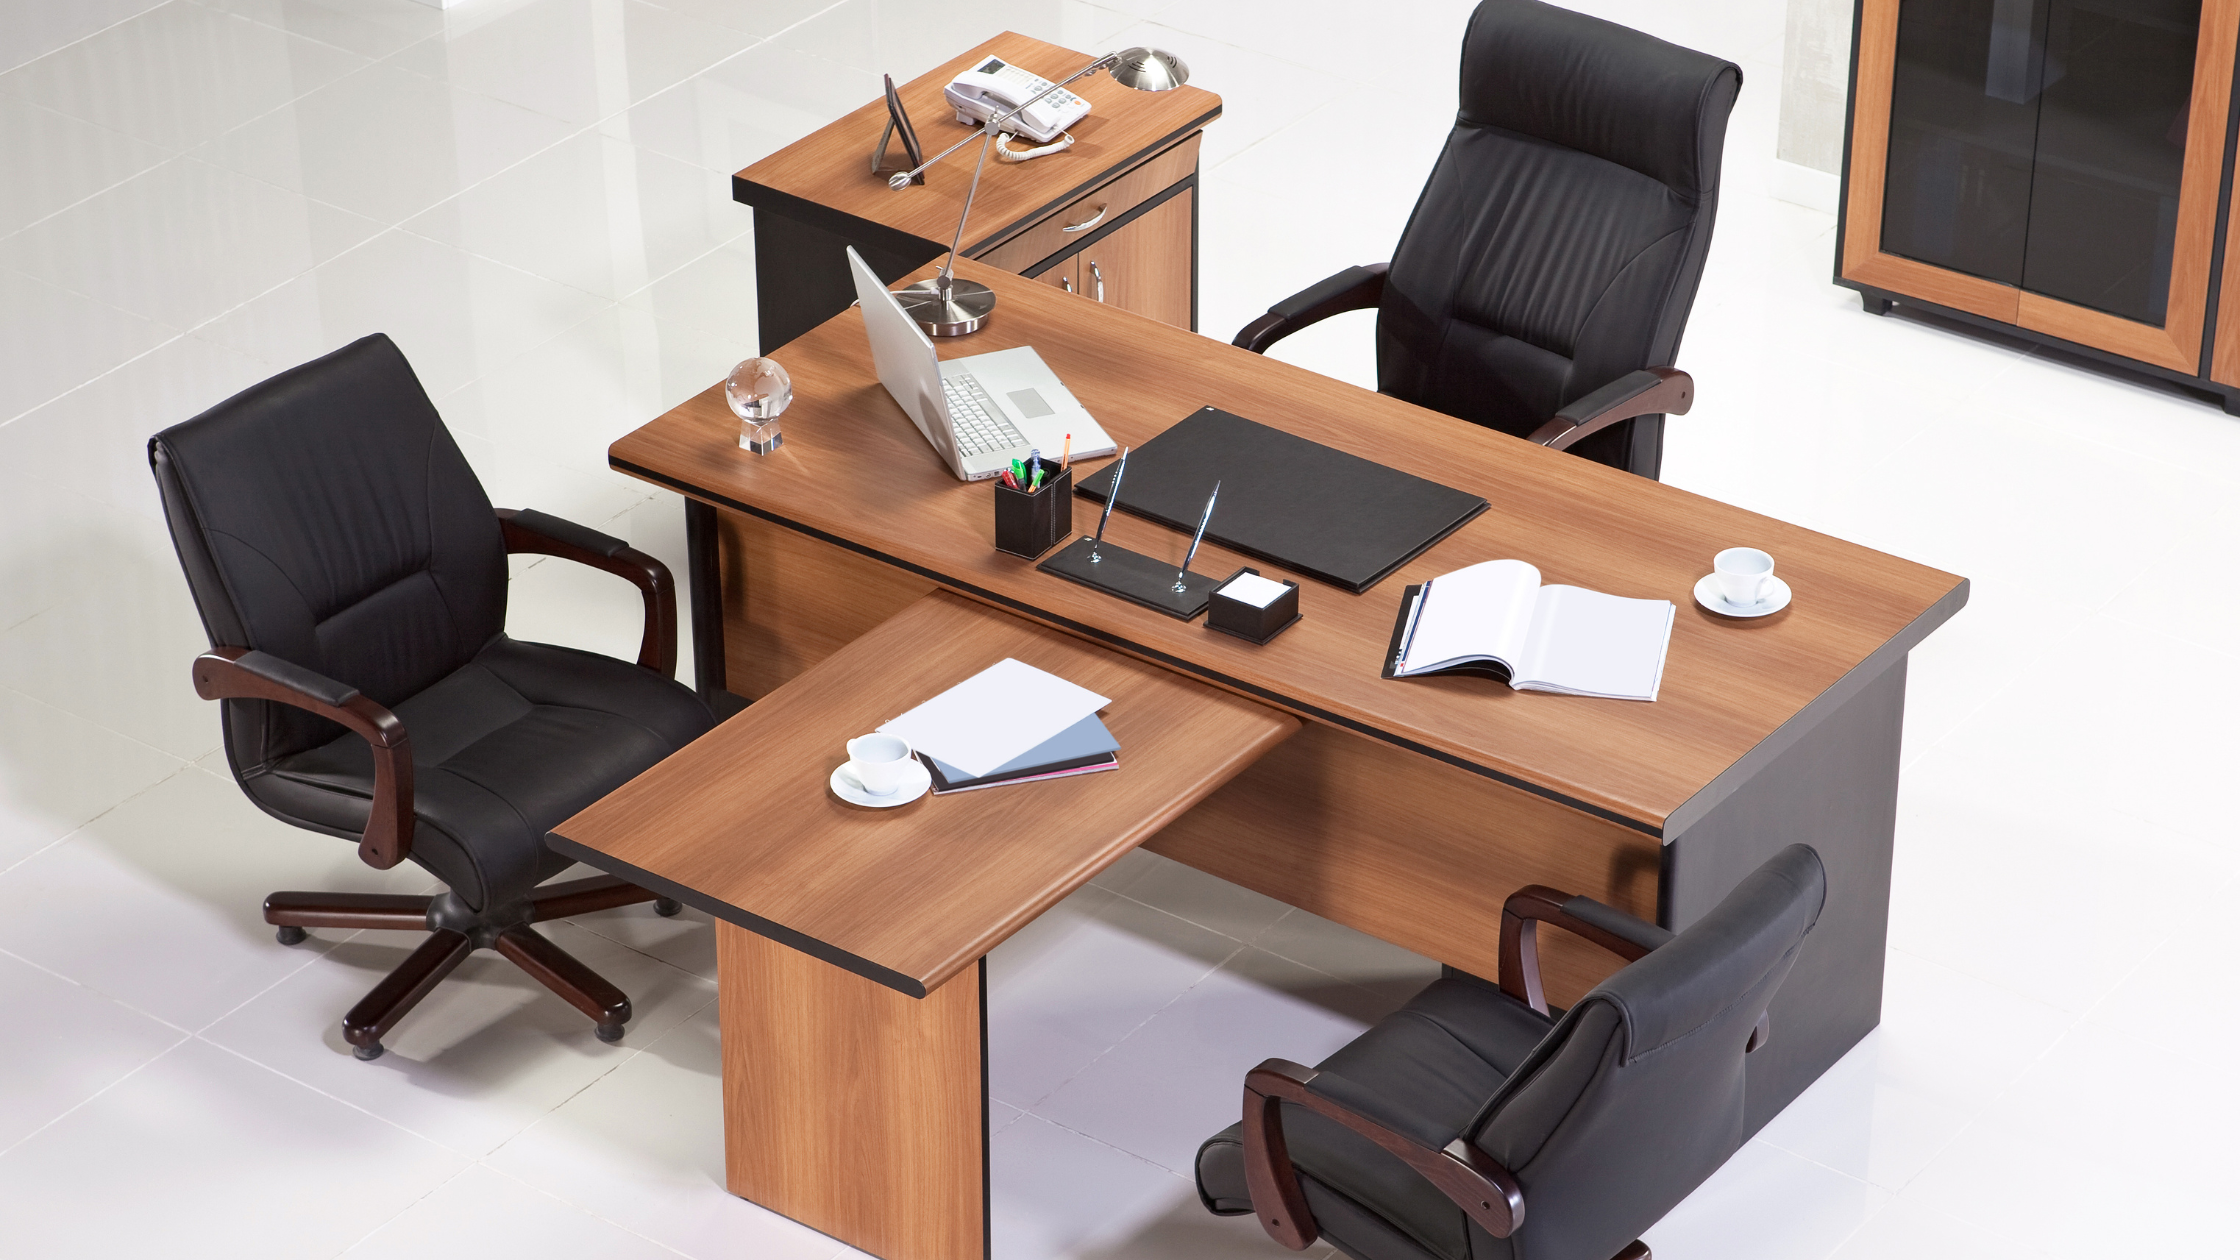 Functional Office Chairs, Desks, and Furniture